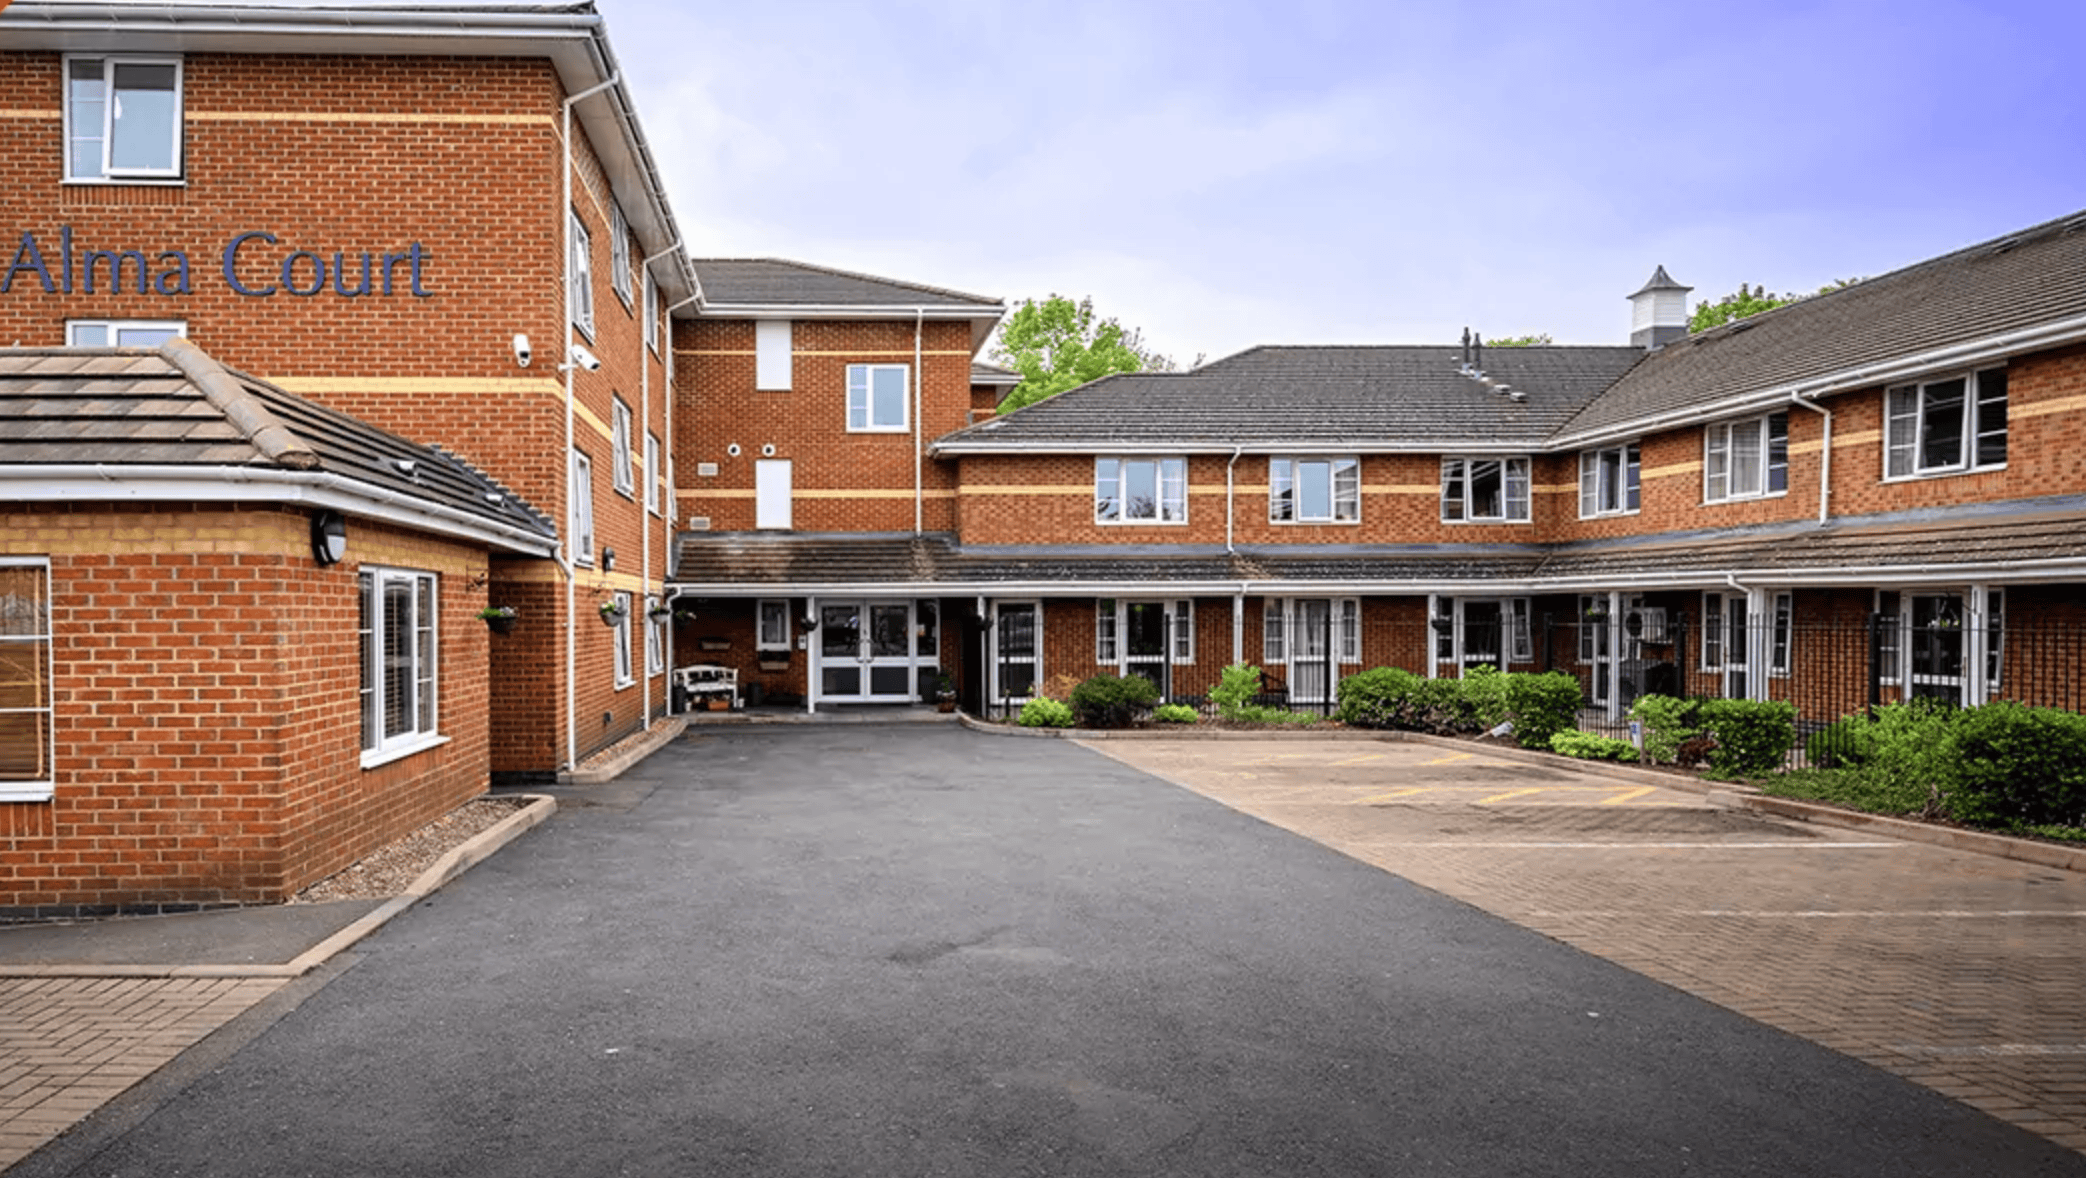 Exterior at Alma Court Care Home, Cannock, Staffordshire